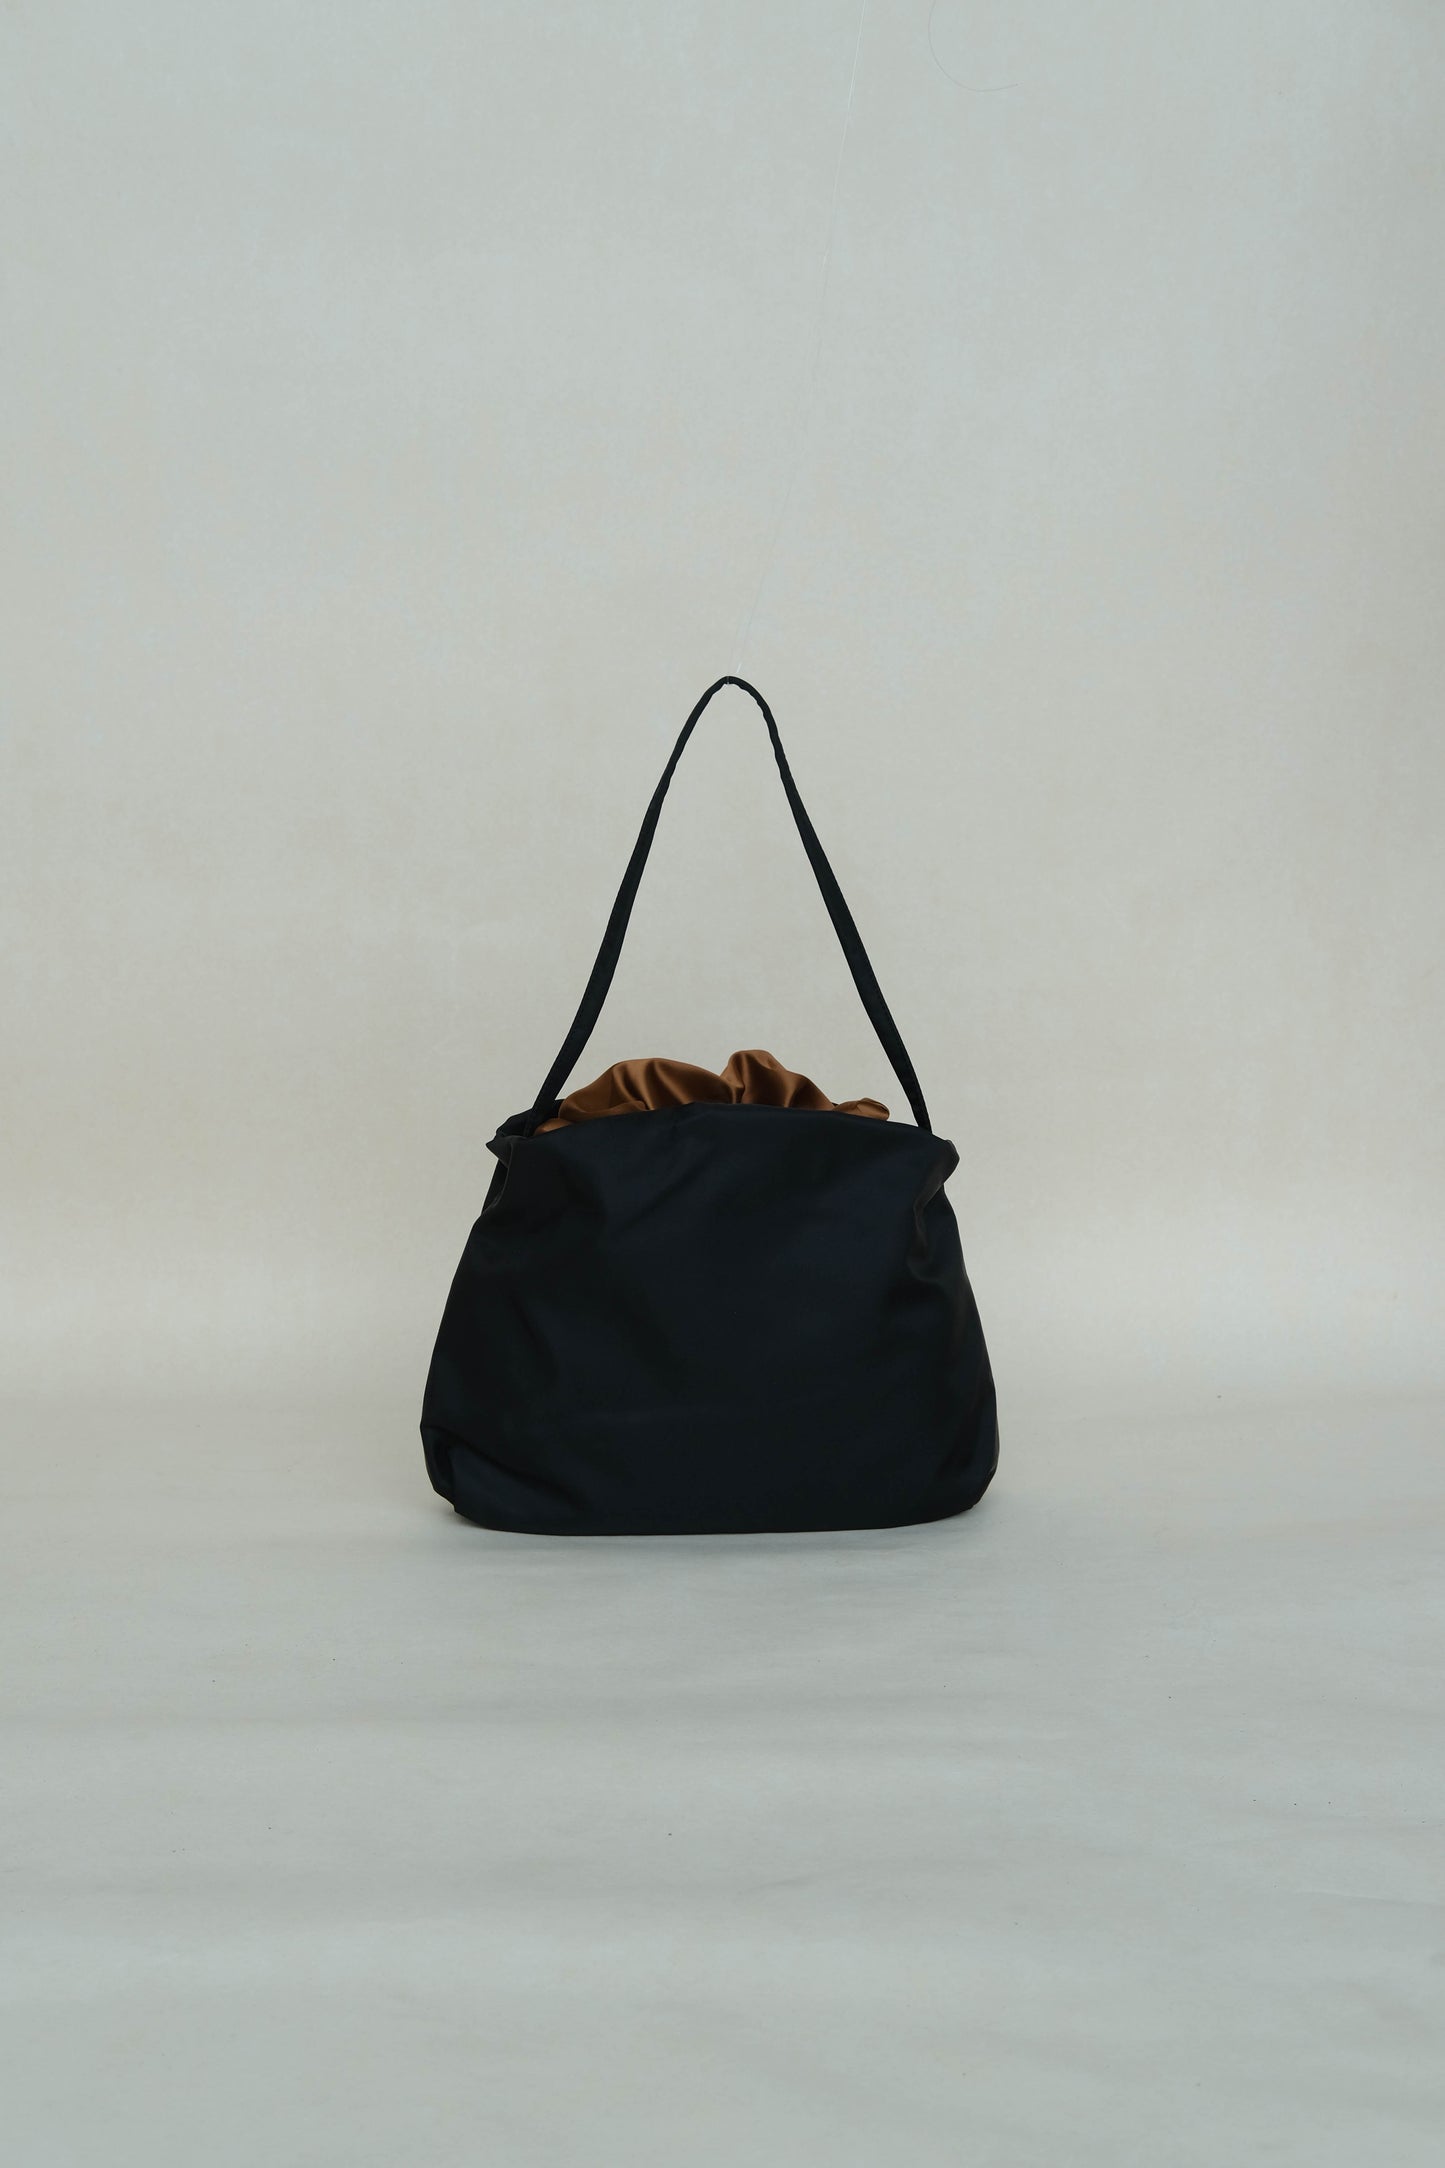 French nylon cloud pleated shoulder bag in classic black